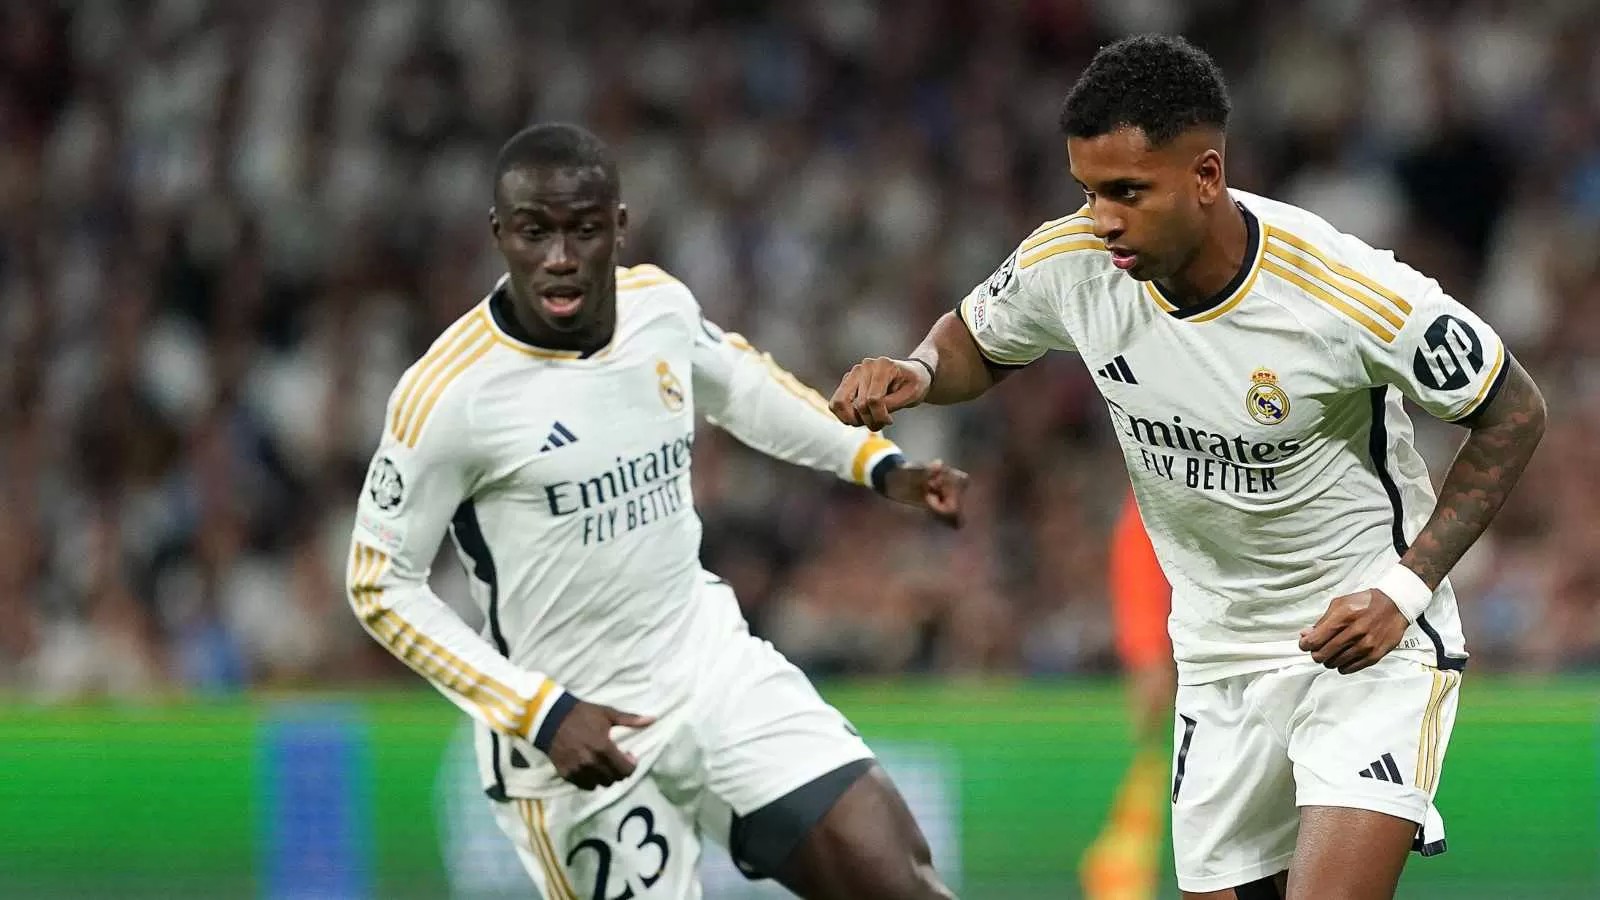 Newcastle snubbed by Real Madrid star for ‘more illustrious club’ amid Arsenal, Liverpool interest